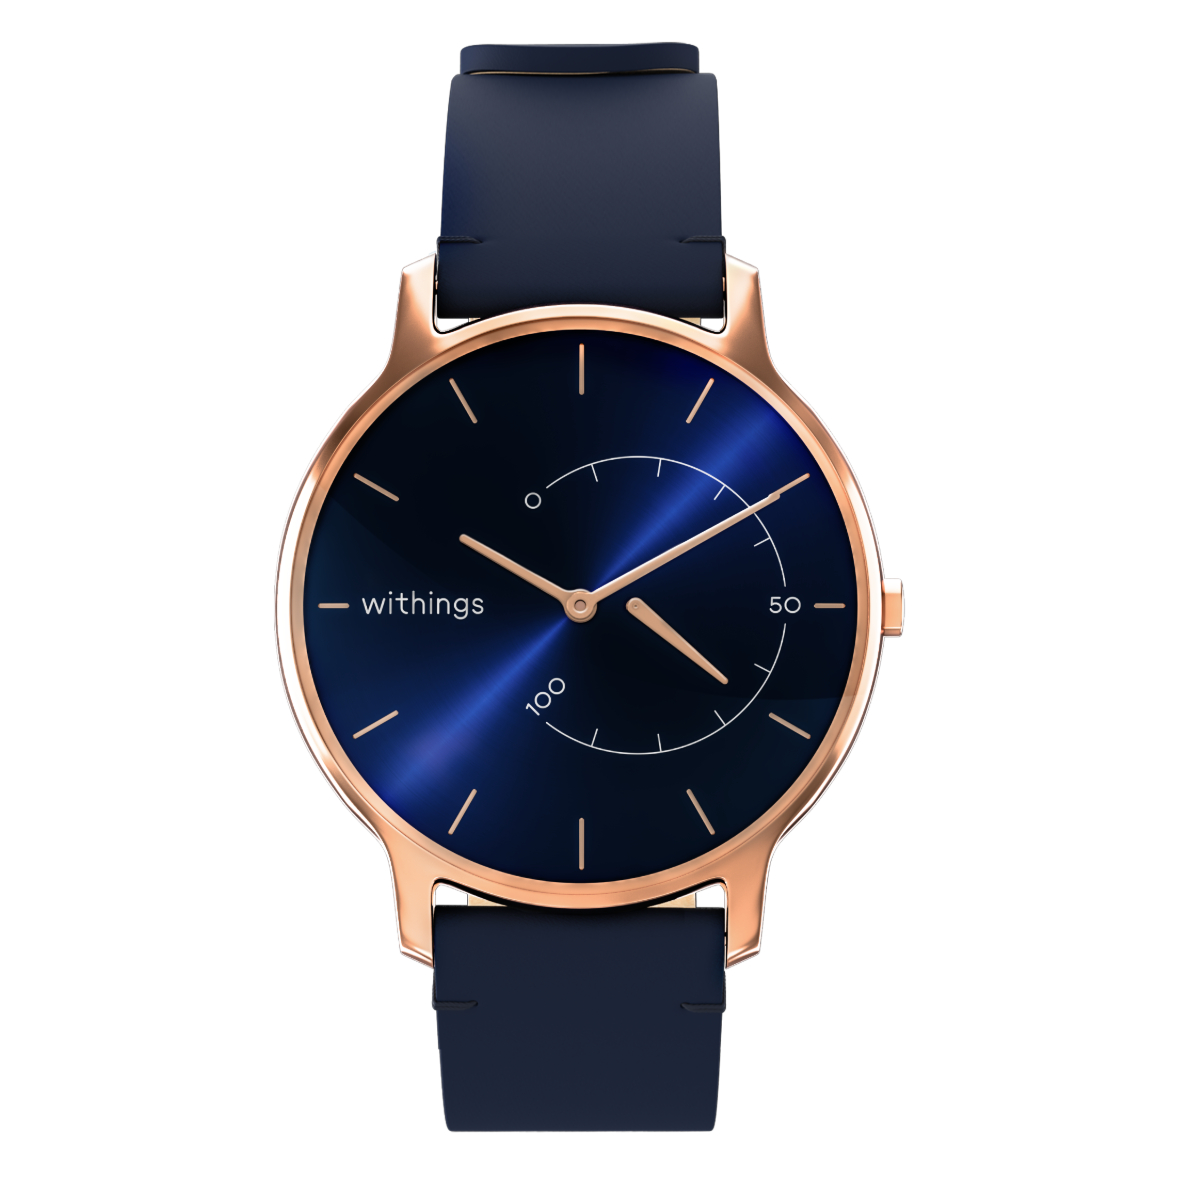 Withings Move Timeless Chic, 38mm, Blue & Rose Gold - Activity tracking watch - Sleep analysis, Water resistant - Withings Official Store